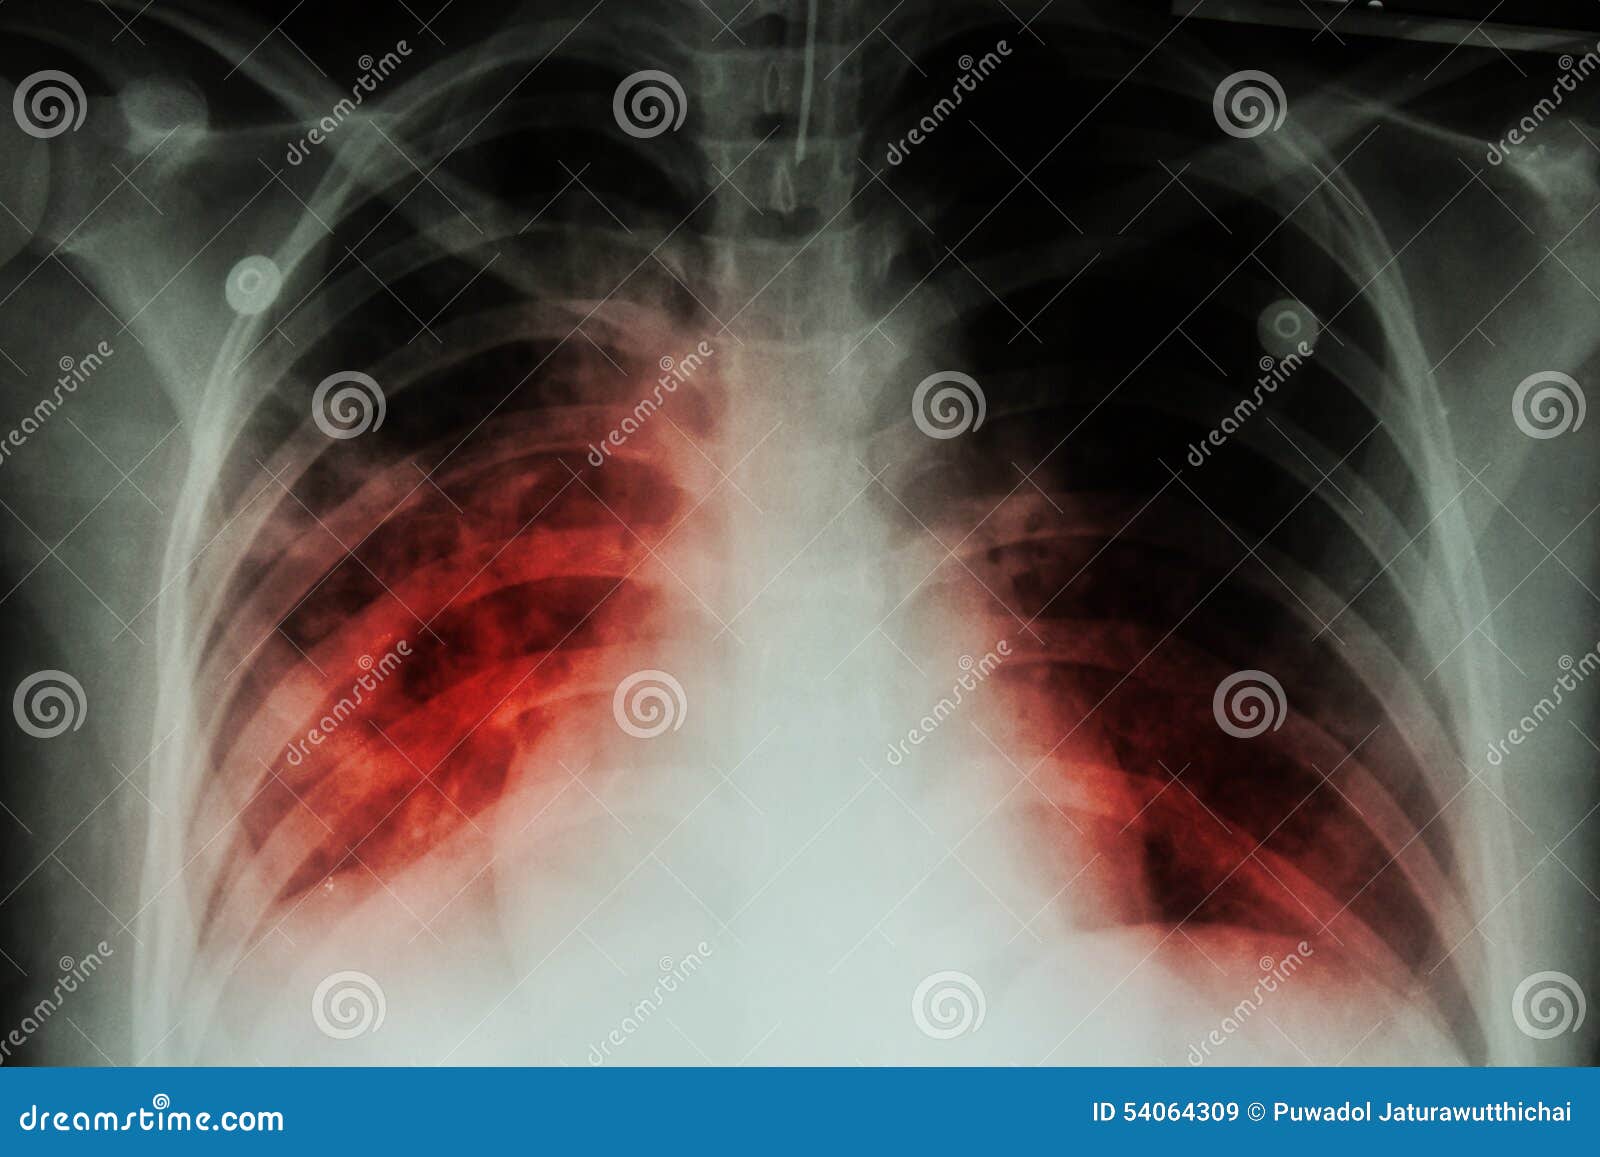 pulmonary tuberculosis ( tb ) : chest x-ray show alveolar infiltration at both lung due to mycobacterium tuberculosis infectionp